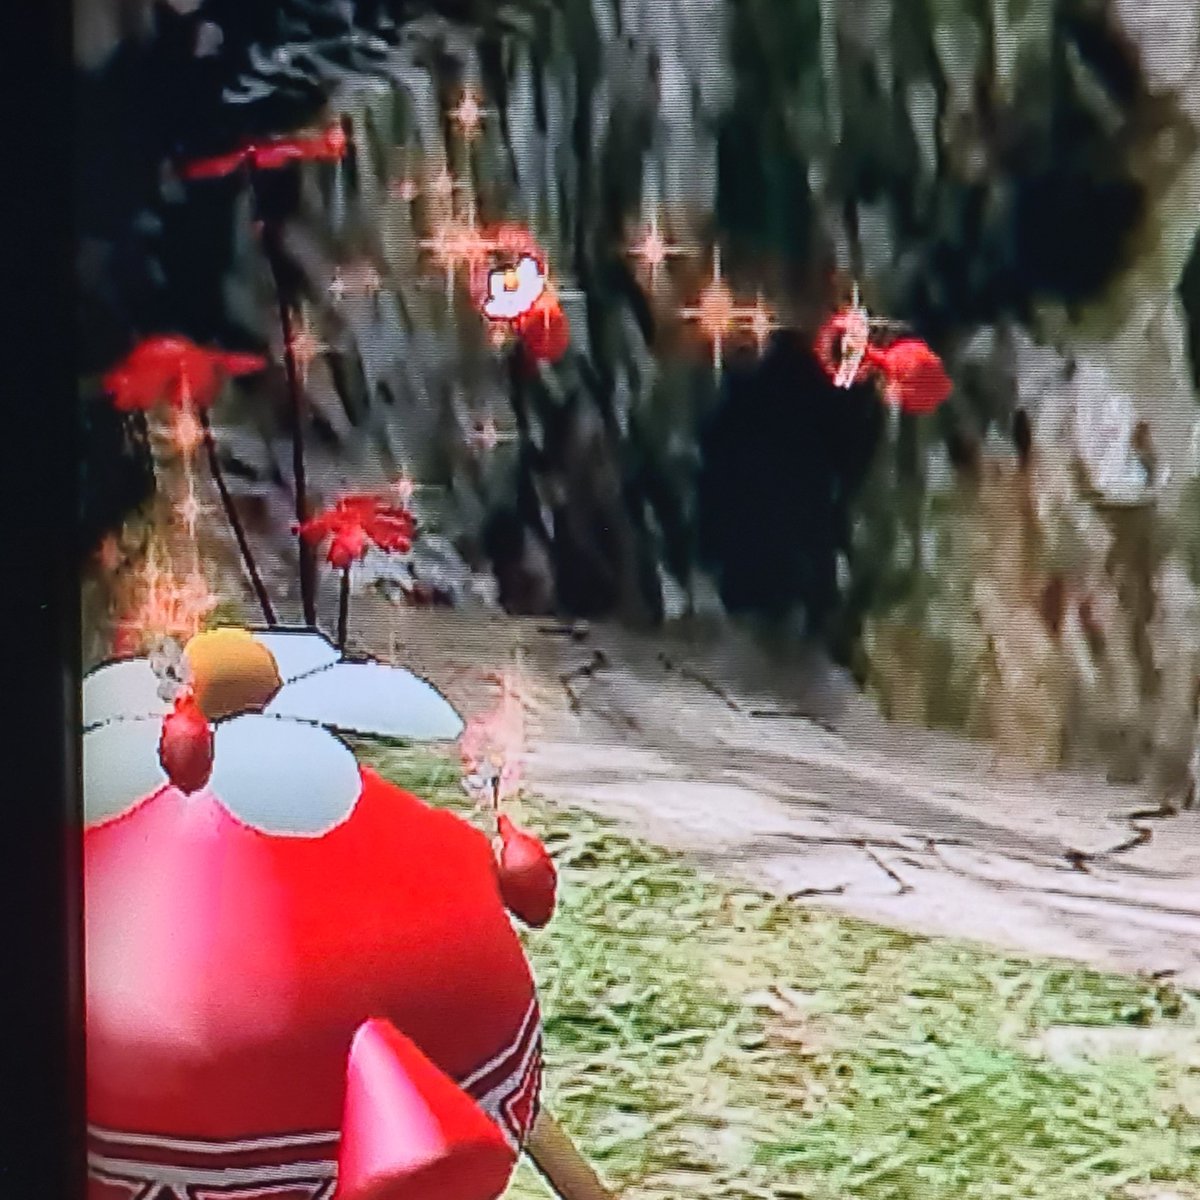 OK, new fact I learned today about #Pikmin1 . Depending on the maturity that the last plucked pikmin was, the next seed that the onion produces will be the same maturity when falling to the ground where it will then start the cycle anew (withered>leaf>bud>flower)